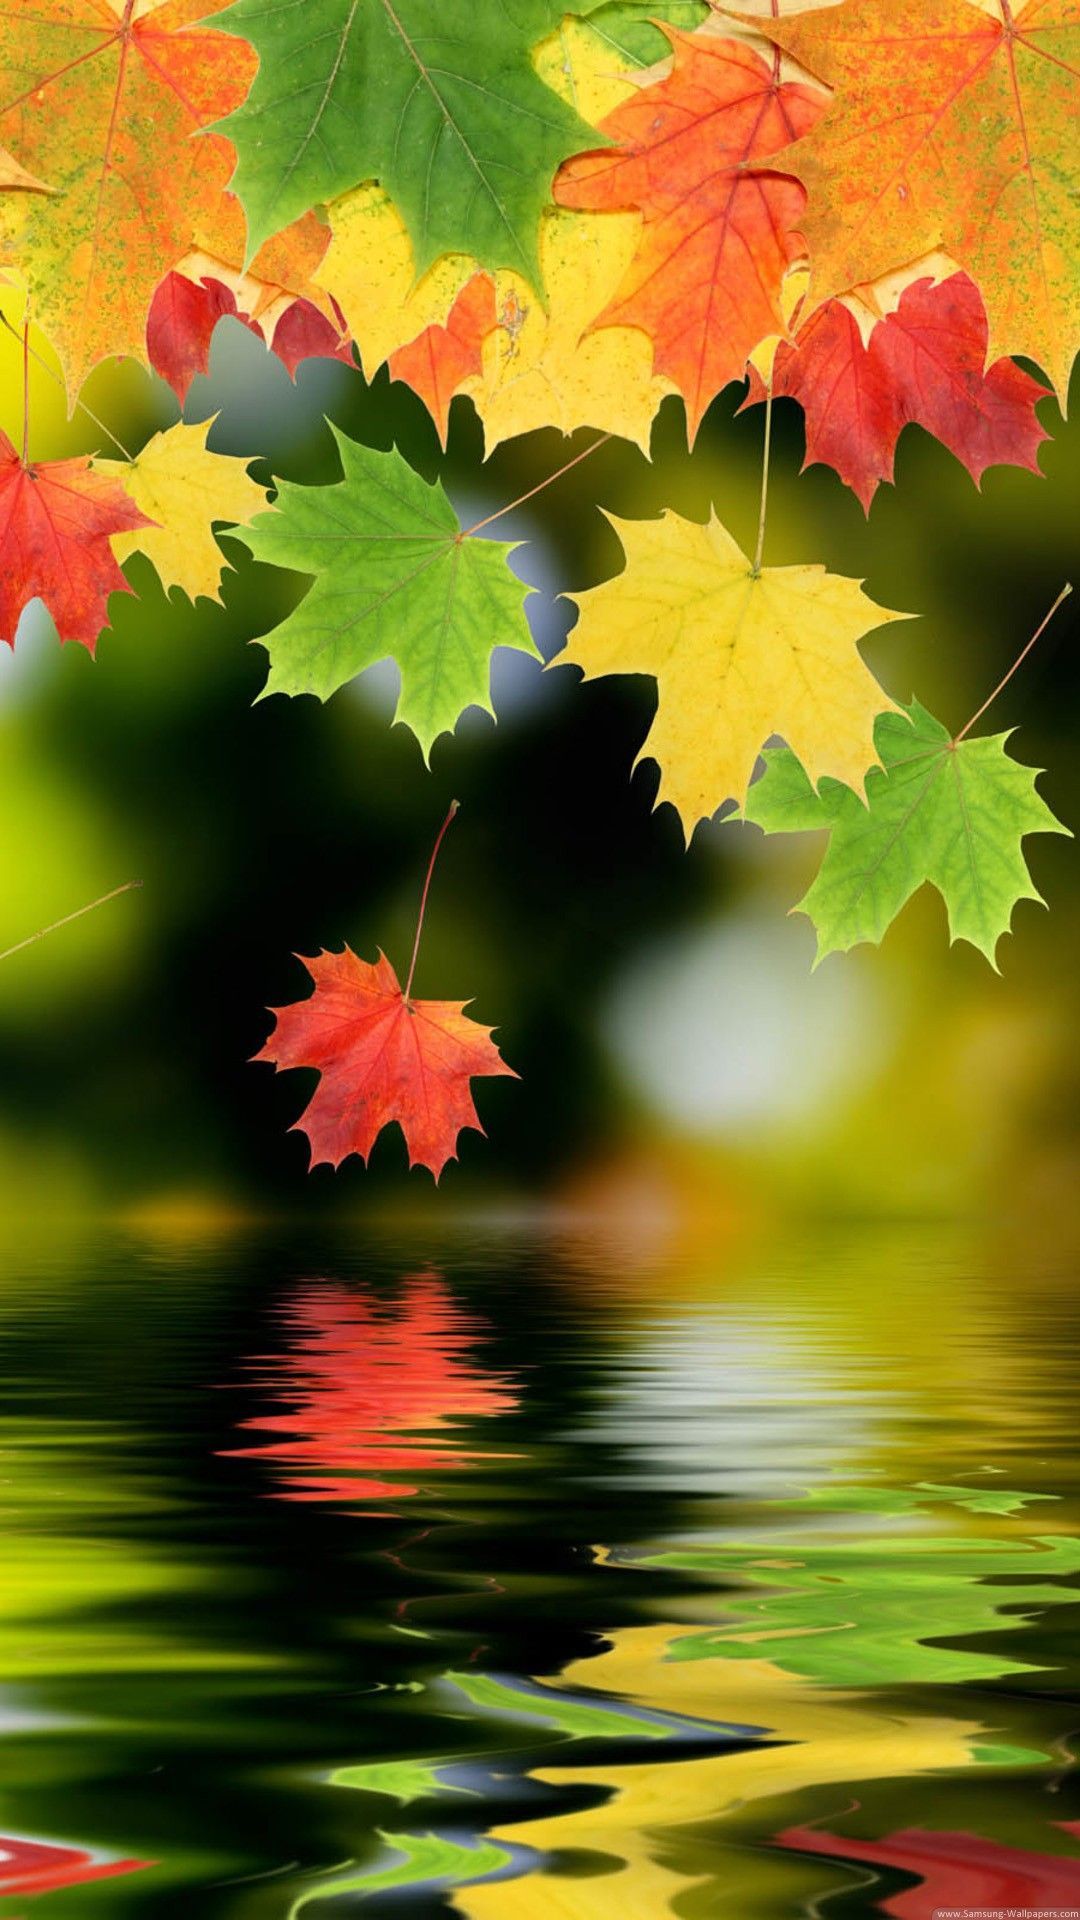 Colorful Autumn Maple Leafs HD Android and iPhone Wallpaper Background and Lockscreen 4K. Nature wallpaper, Fall wallpaper, S5 wallpaper